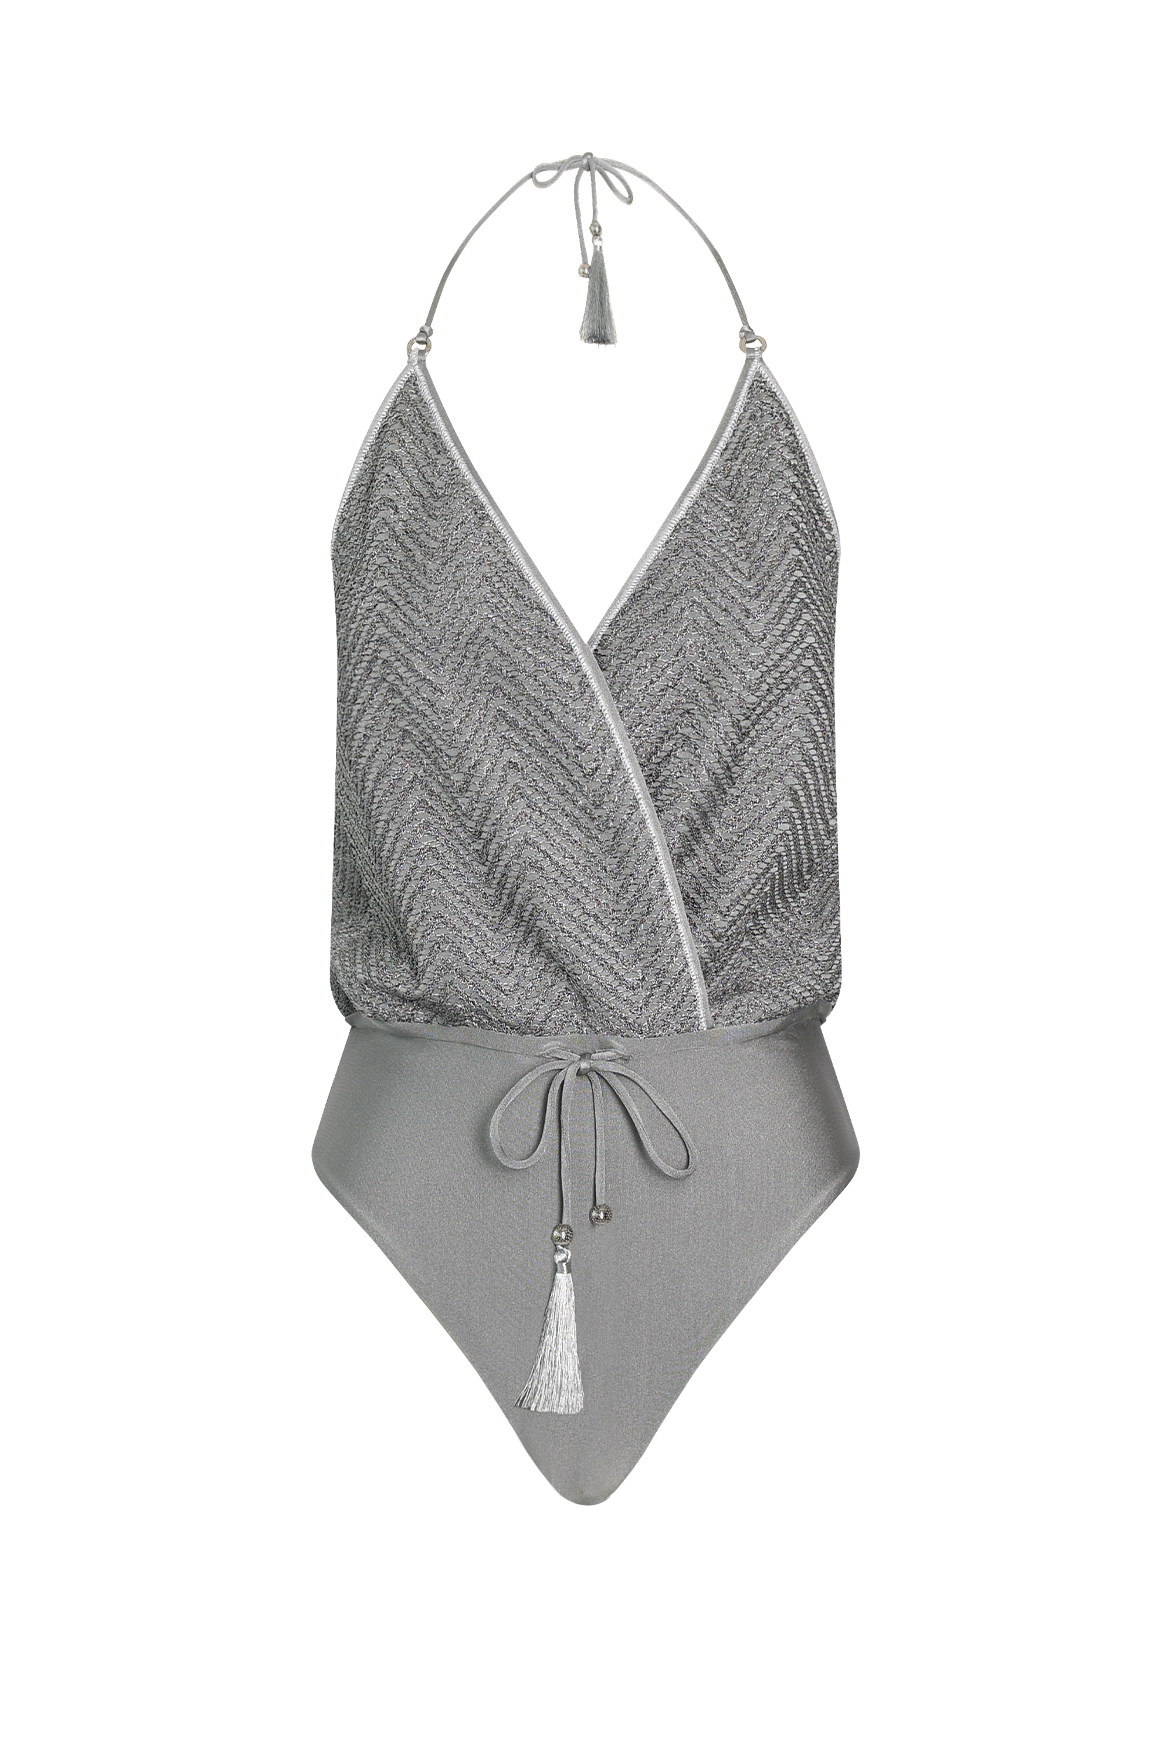 Product photo of vacation Silver Knit Swimsuit doubles as top for warm beach swimming & vacation.